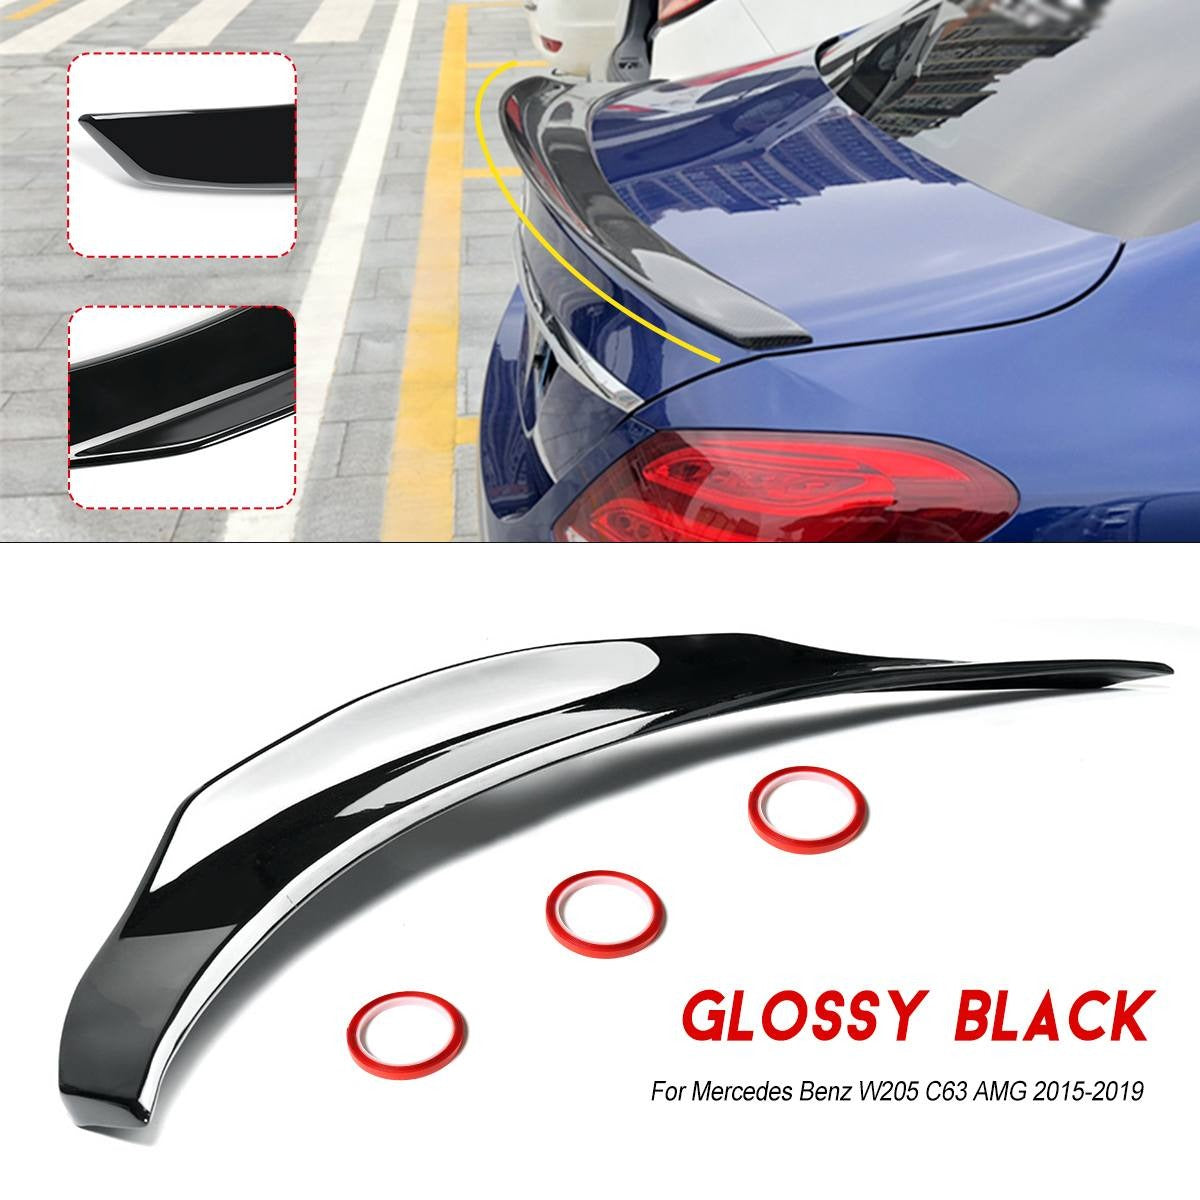 Car Wing Spoiler ABS Glossy Black Highkick Trunk Spoiler Wing For Mercedes Benz W205 C63 AMG 2015-2019